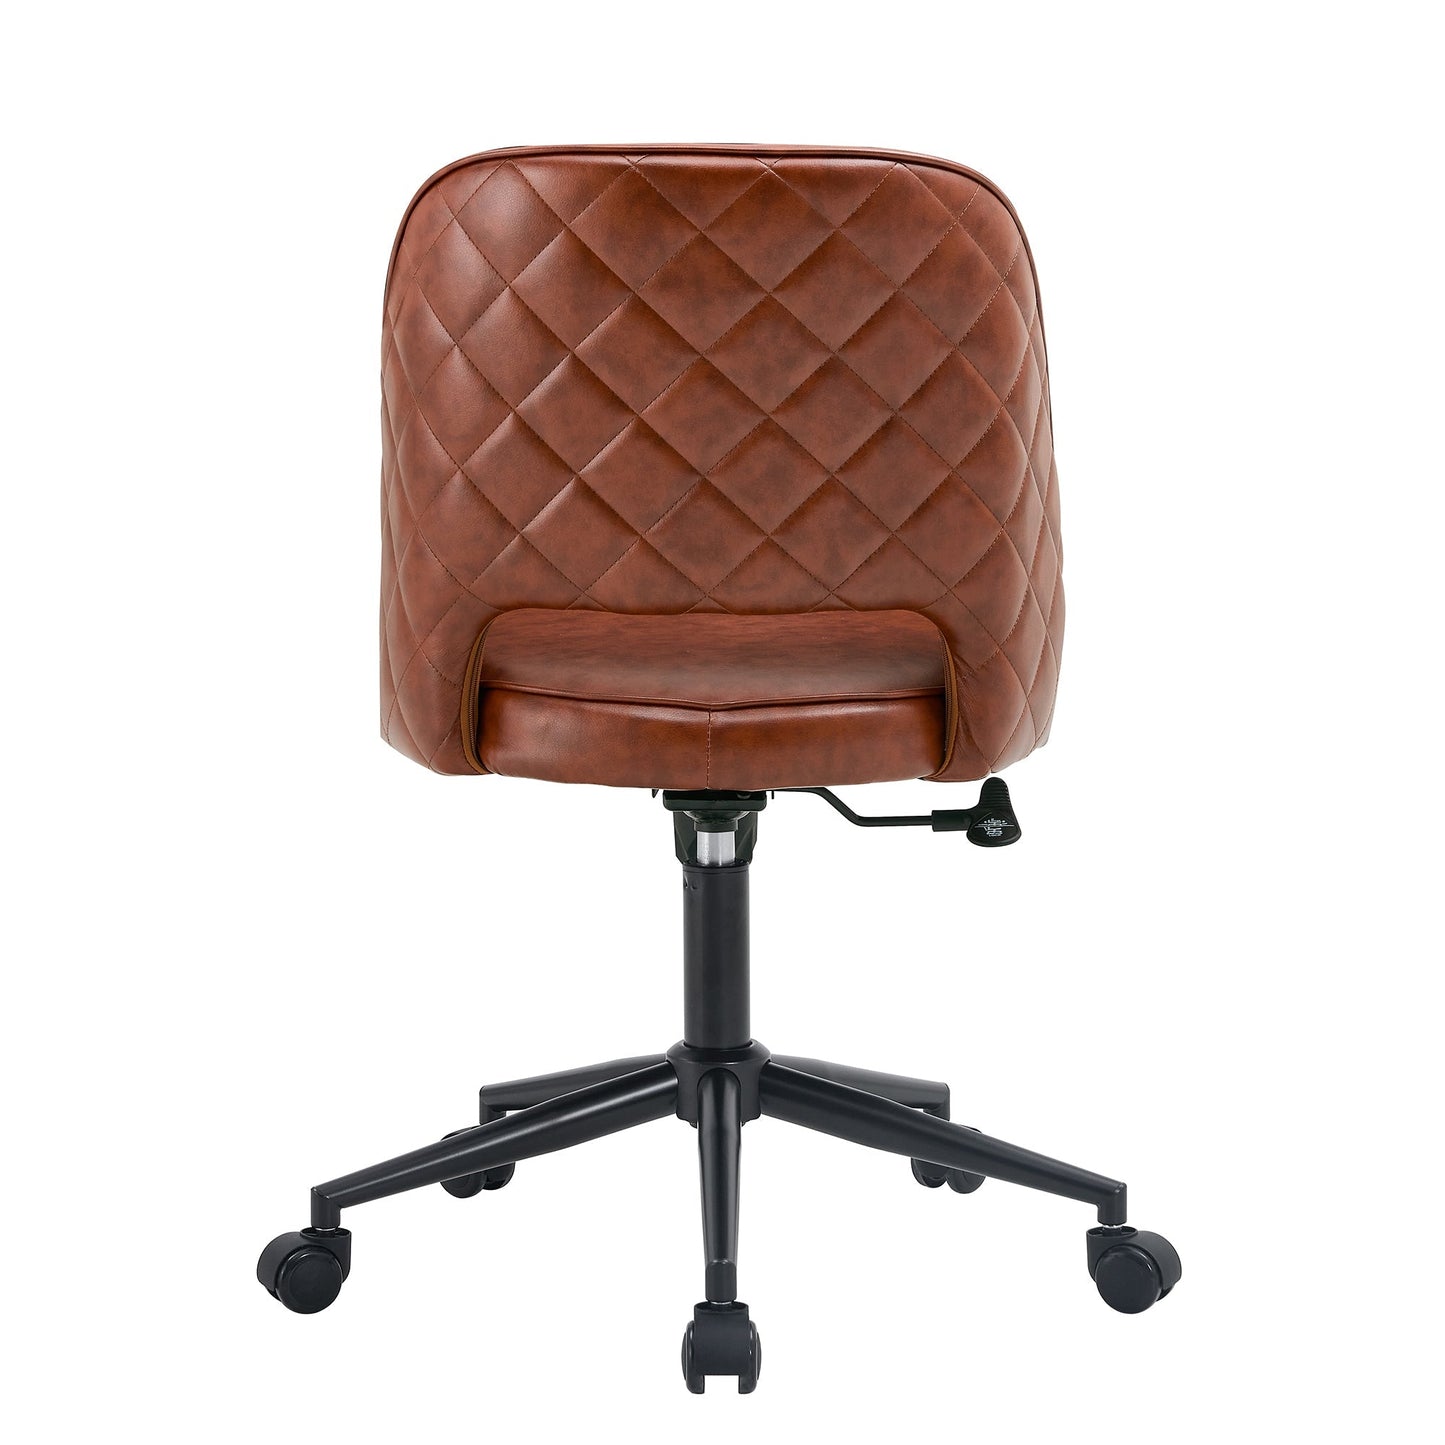 Modern home brown PU Office chair adjustable 360 ° swivel chair engineering plastic armless swivel computer chair with wheels living room bedroom office hotel dining room brown chair